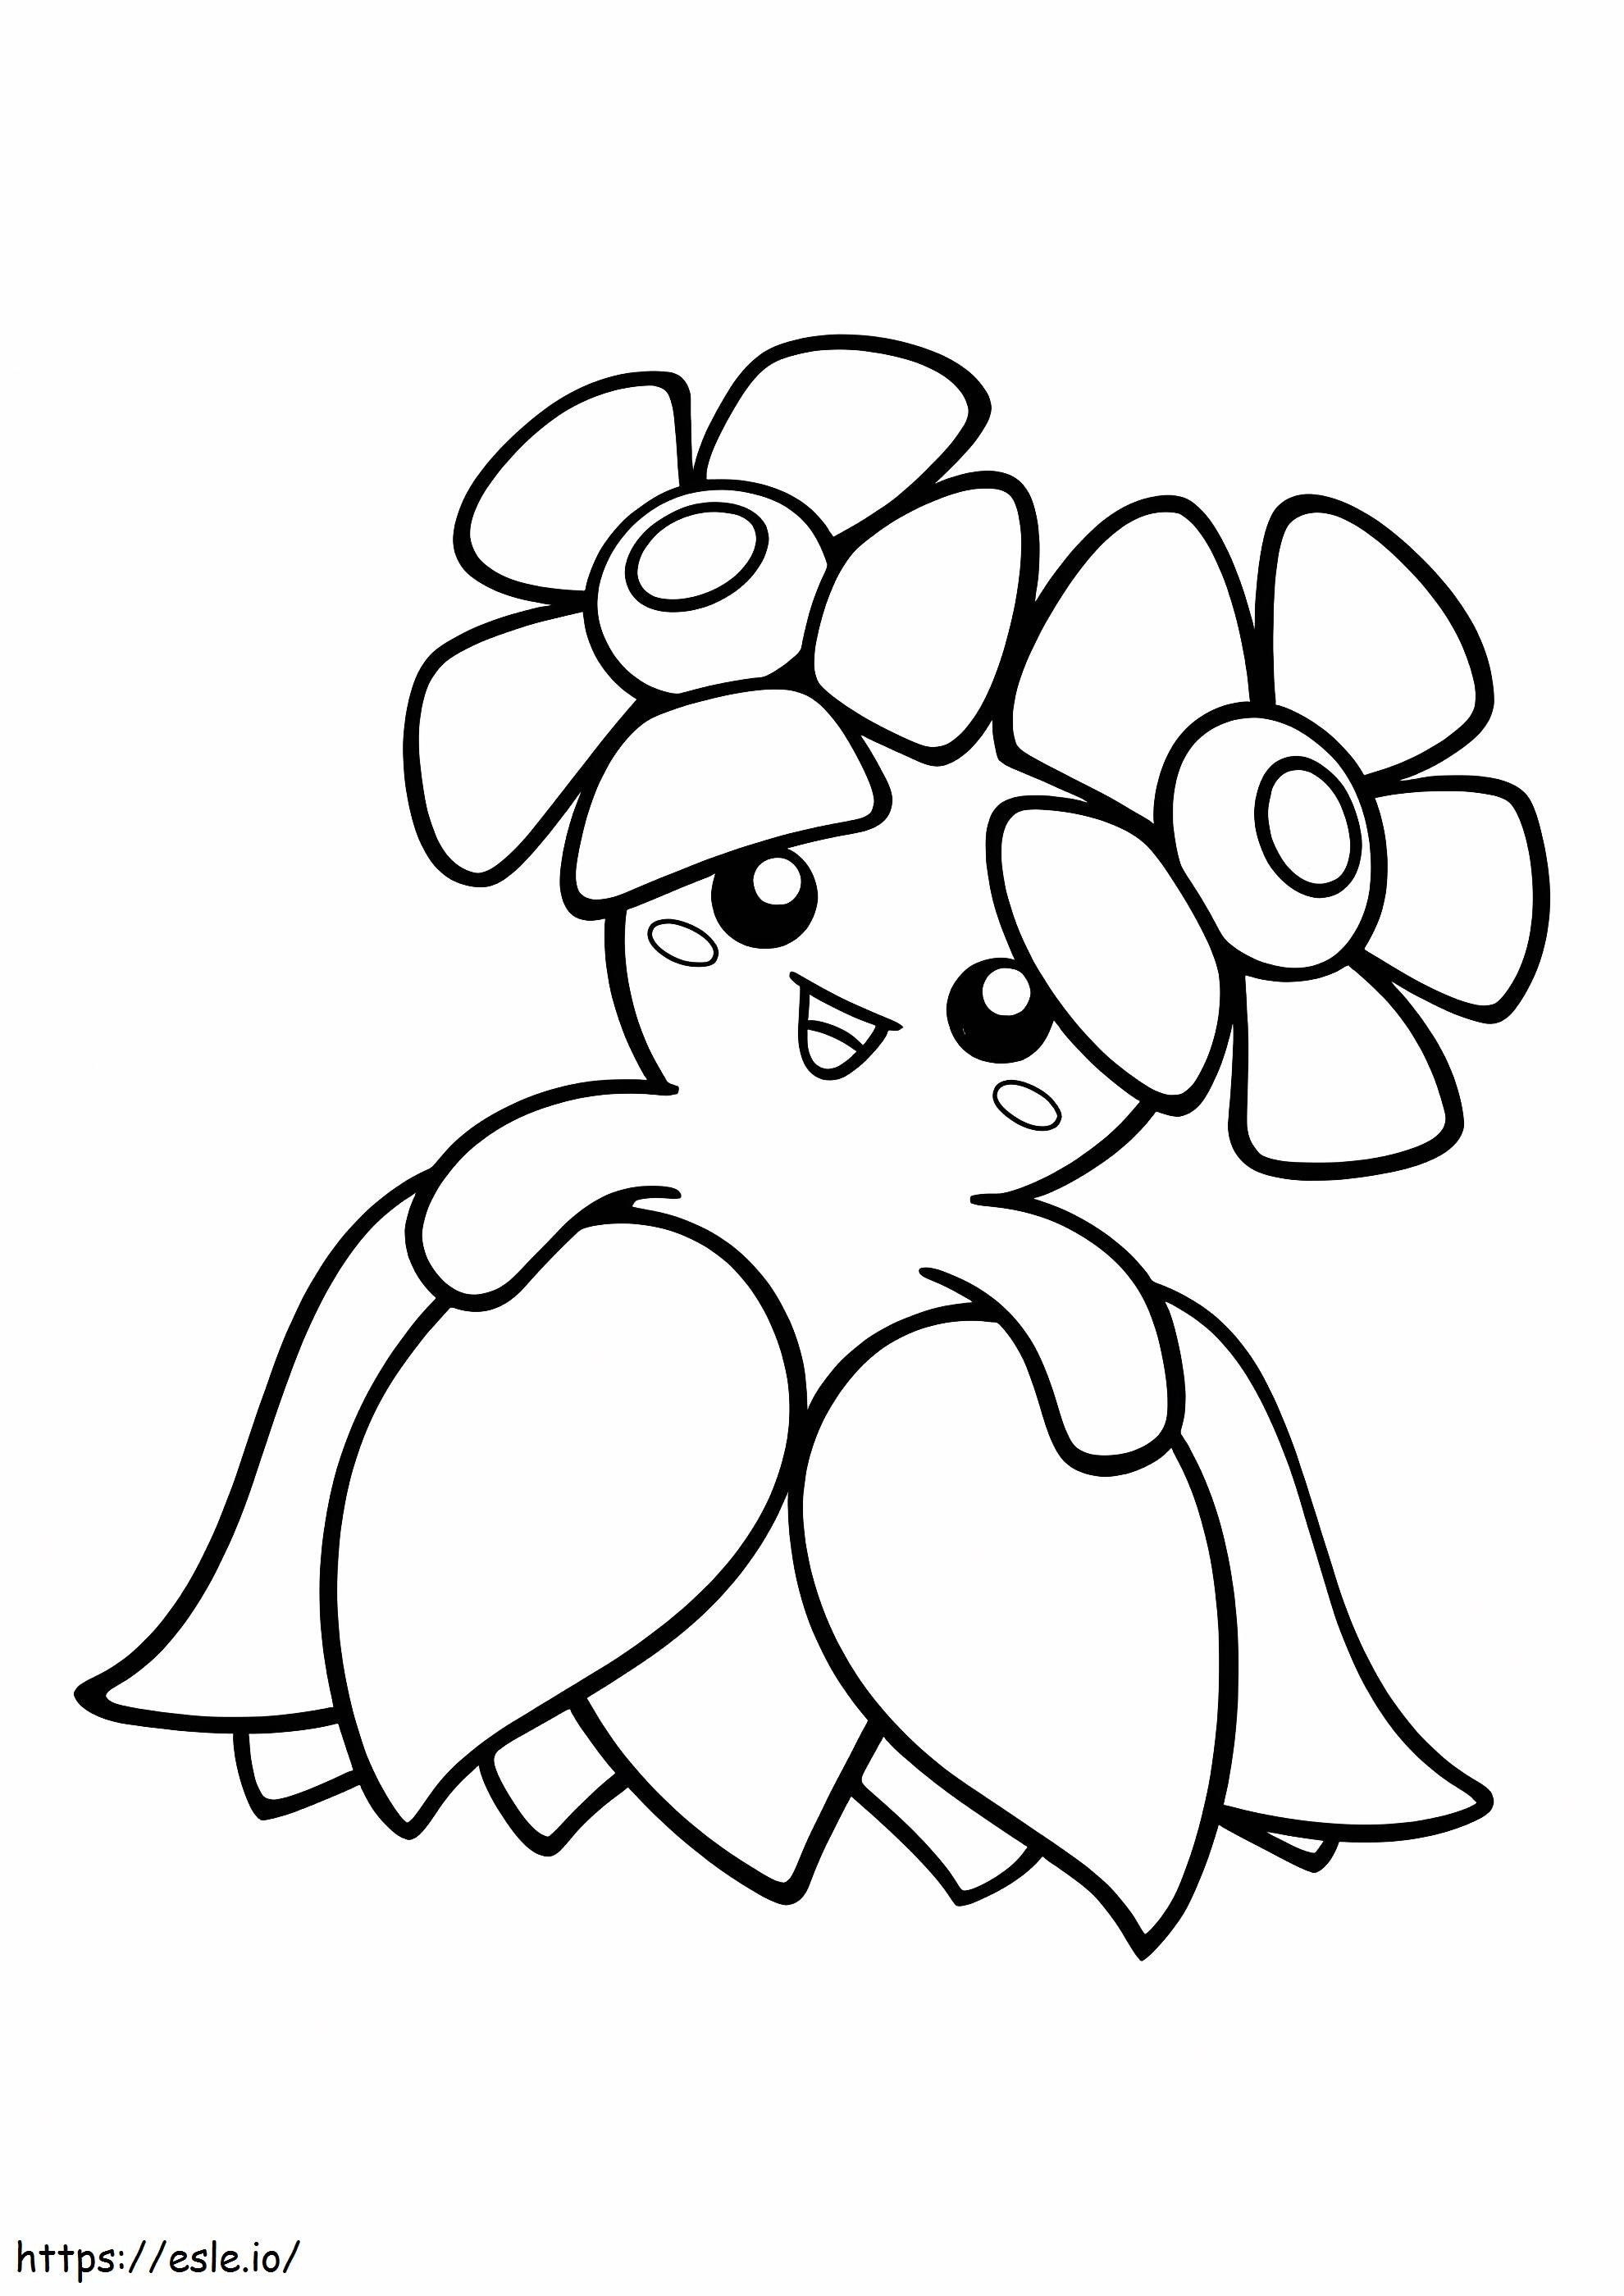 Lovely Bellossom Pokemon coloring page